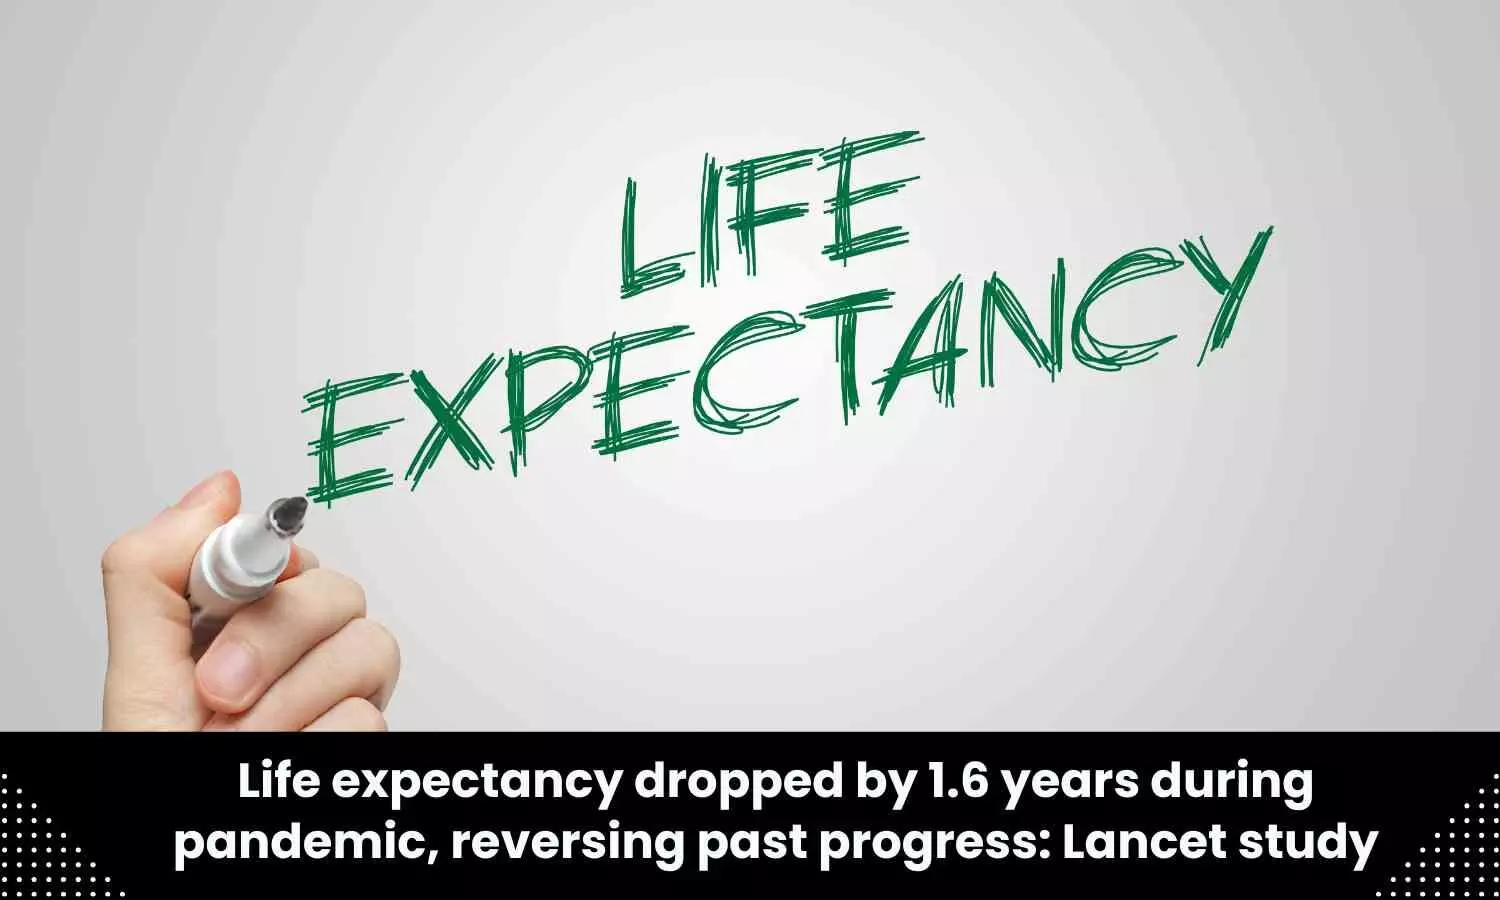 Life expectancy dropped by 1.6 years during pandemic, reversing past progress, says Lancet study